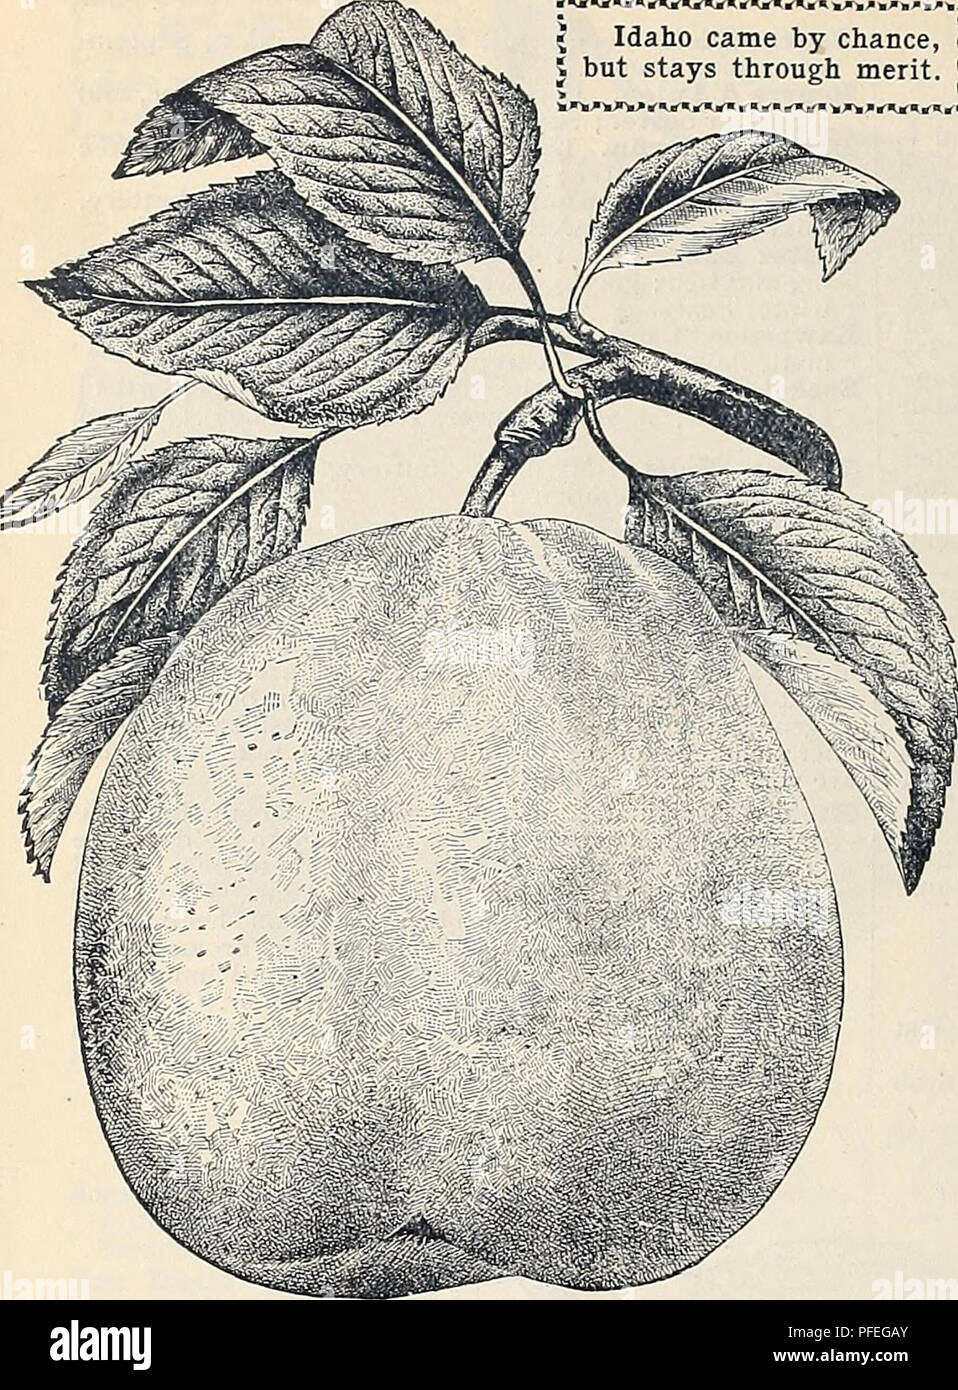 . Descriptive and illustrated catalogue of fruit trees, ornamental plants and roses. Nurseries (Horticulture) Georgia Atlanta Catalogs; Fruit trees Seedlings Catalogs; Fruit Catalogs; Plants, Ornamental Catalogs; Flowers Catalogs; Shrubs Catalogs. W. D. Beatie, Atlanta, Georgia. * ****** « ******* * * ** « *** * *** * » * * * . * * ; Idaho came by chance, « J but stays through merit. J  -***************.*******». PEARS, continued. Le Conte. Large, oblong-pyriform; basin deep and irregular; skin smooth, pale yellow ; quality variable, but if picked as soon as mature and allowed to ripen in a c Stock Photo